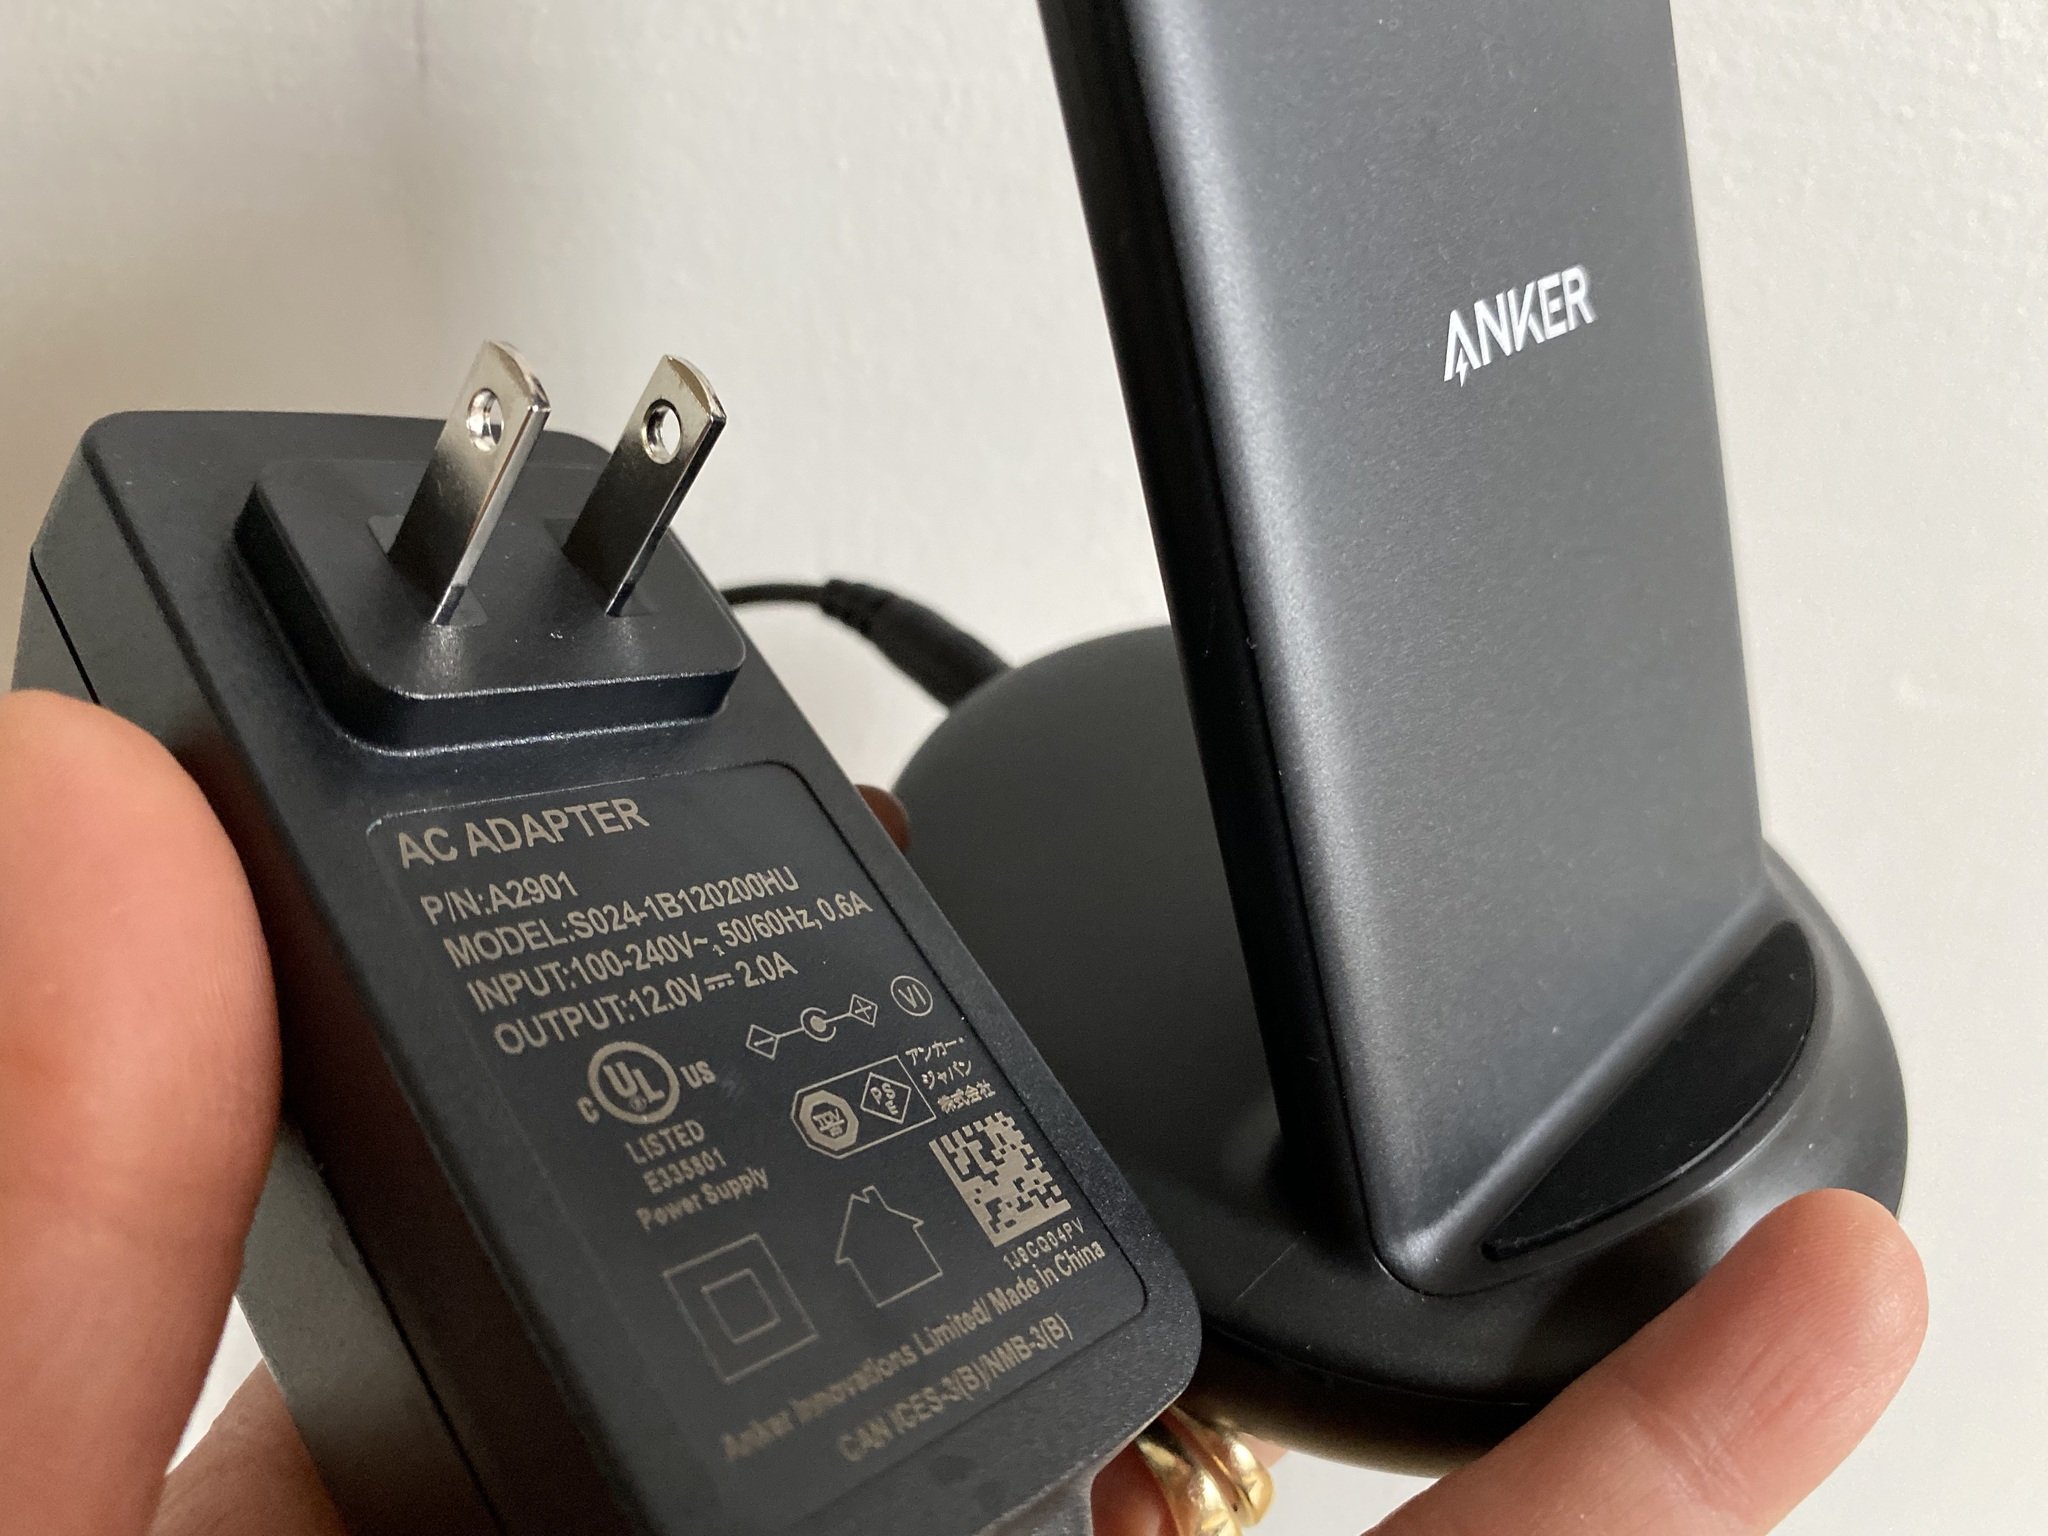 Anker Powerwave Ii Stand Wireless Phone Charger